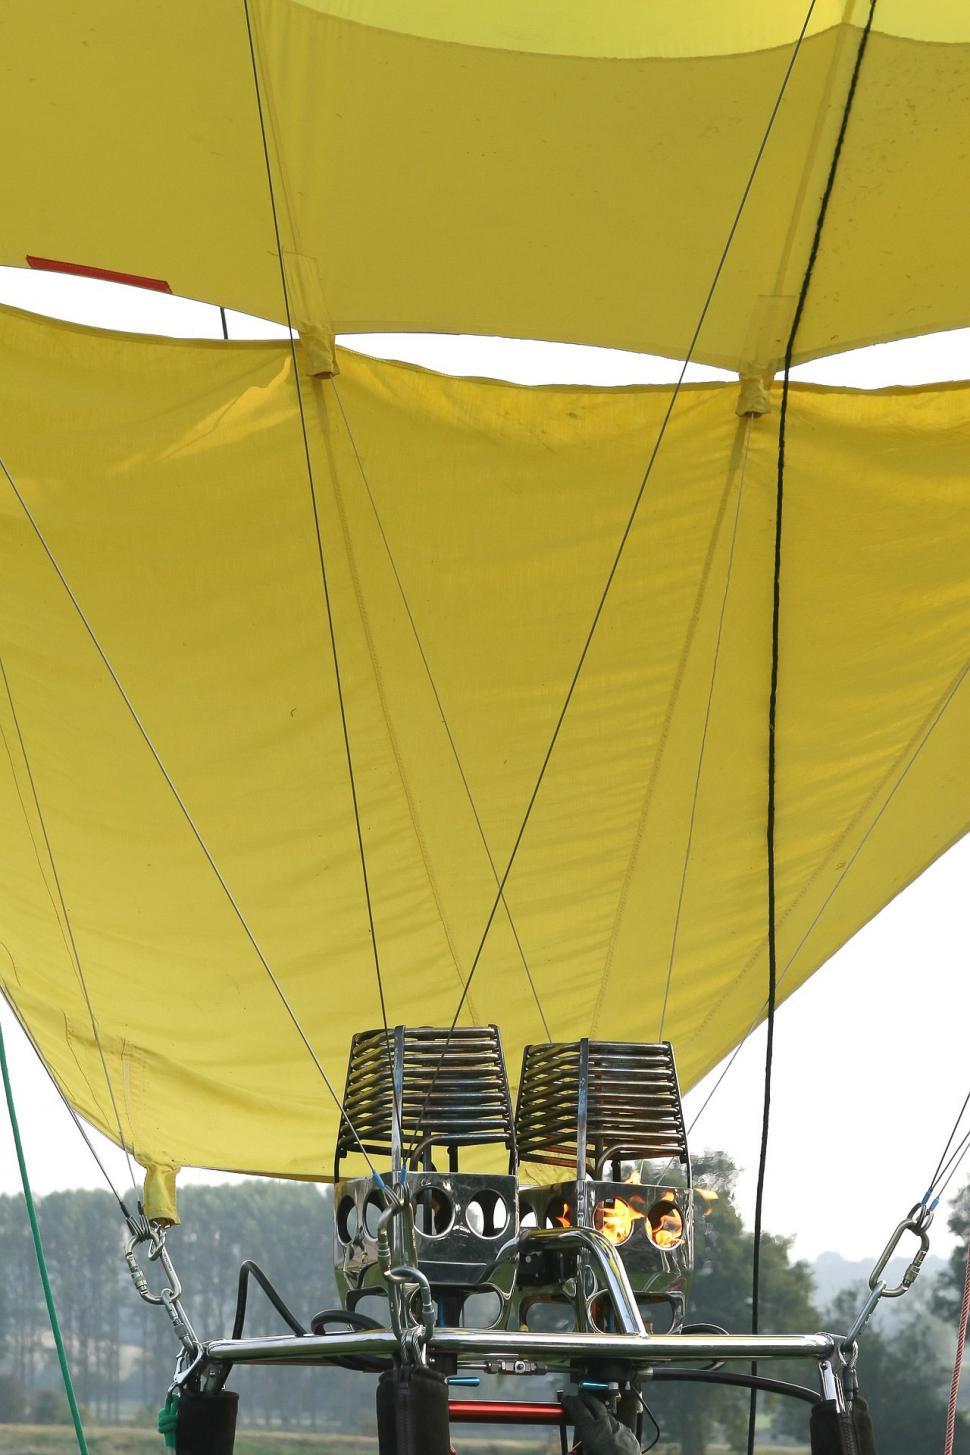 Free Image of Inside of a Yellow Hot Air Balloon 